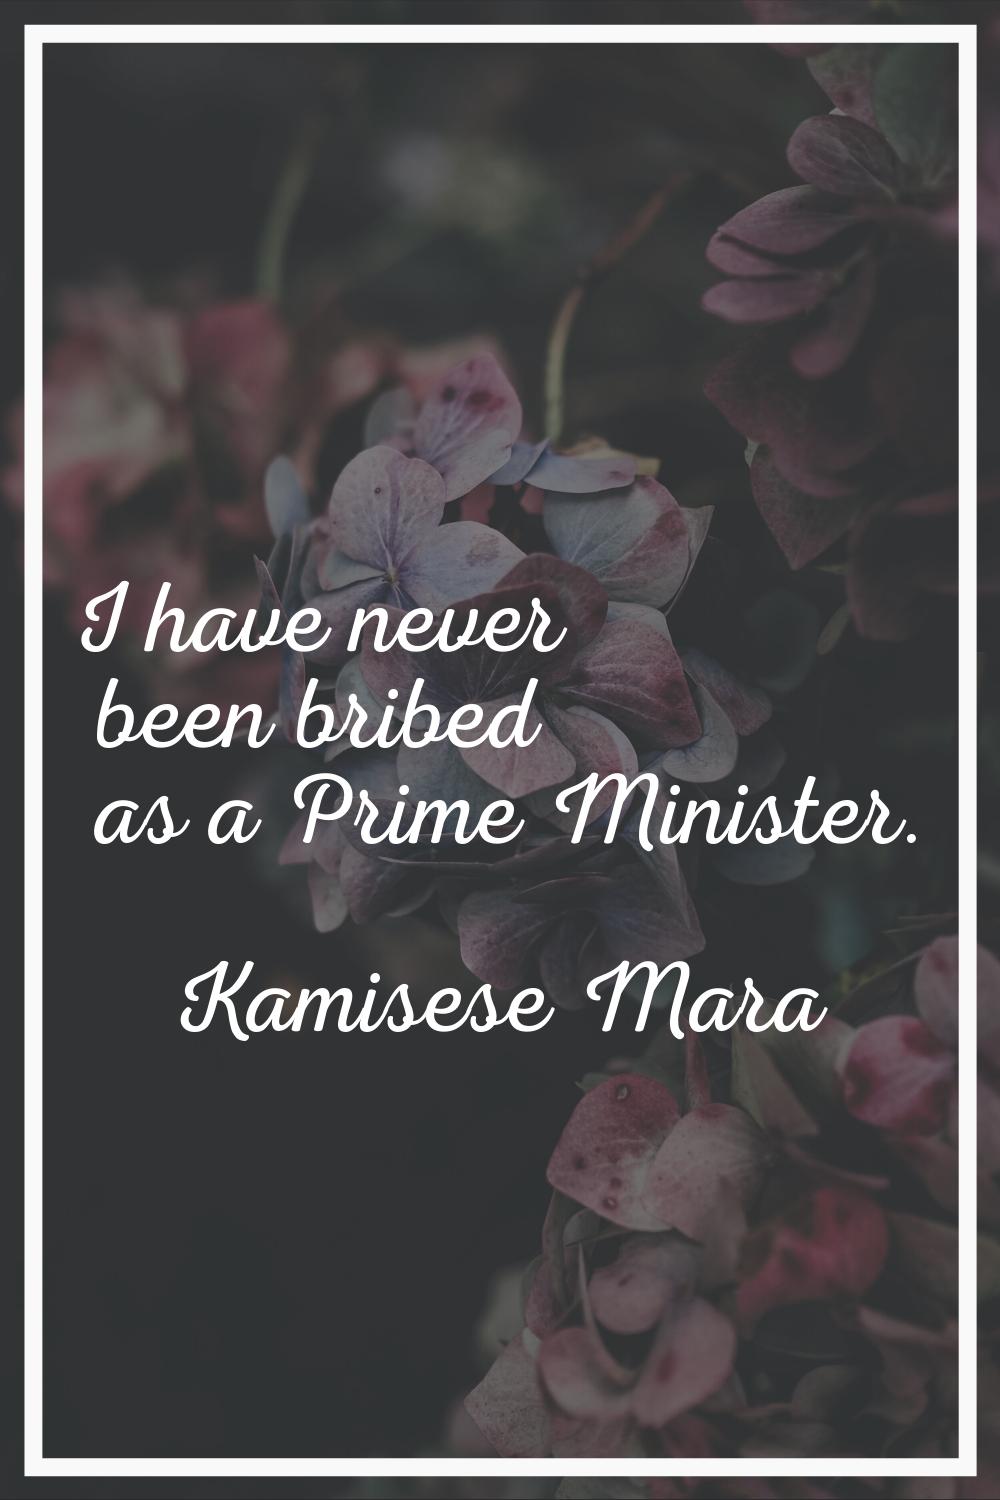 I have never been bribed as a Prime Minister.